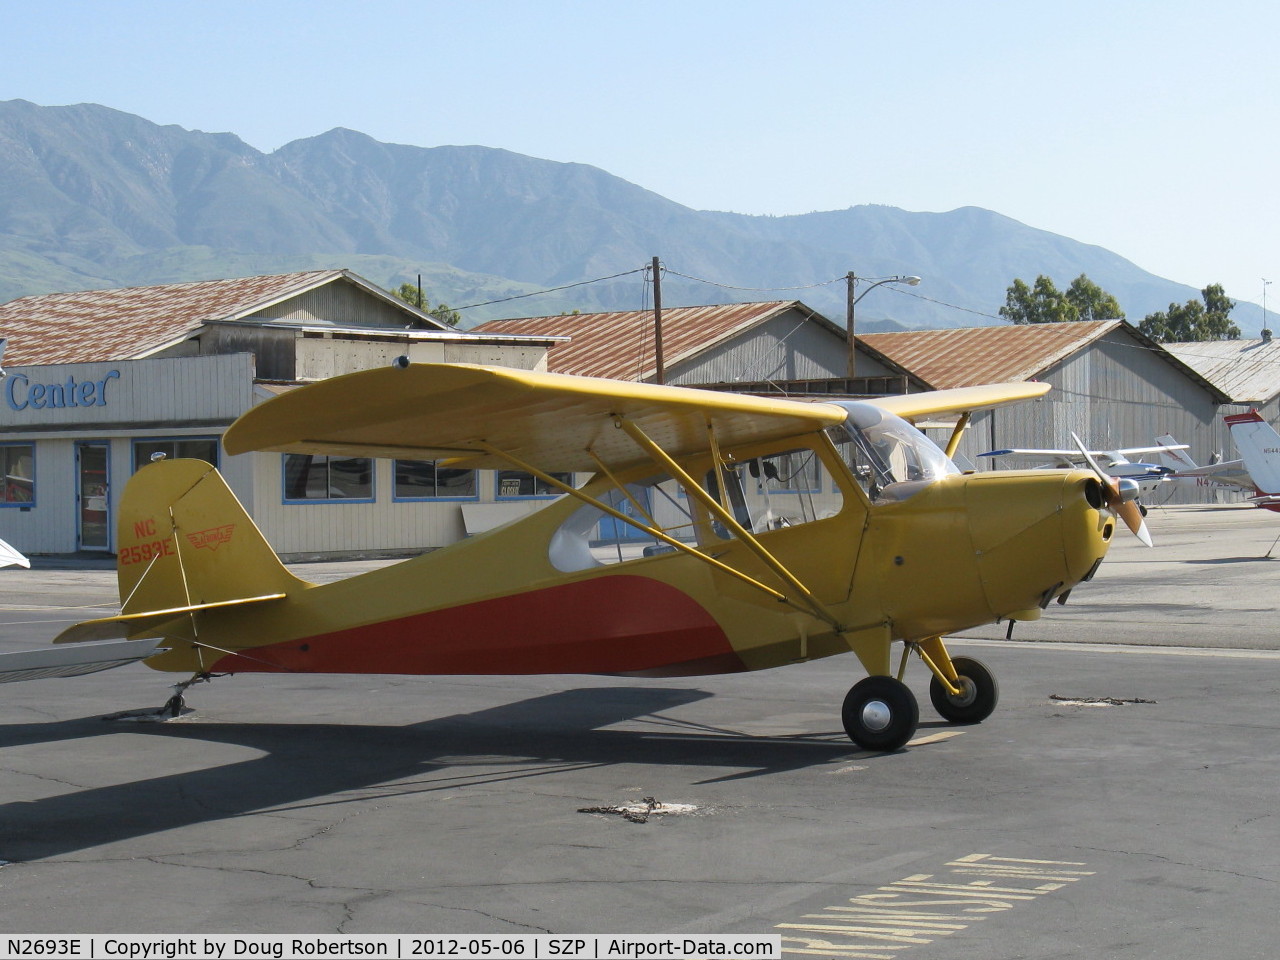 N2693E, 1946 Champion 7CCM C/N 7AC-6273, 1946 Aeronca 7CCM CHAMPION conversion from 7AC, Continental C90 90 Hp, the 7CCM was first produced in 1948 with larger tail fin, C90, 19 vice 13 gallons, etc. South Dakota visitor.